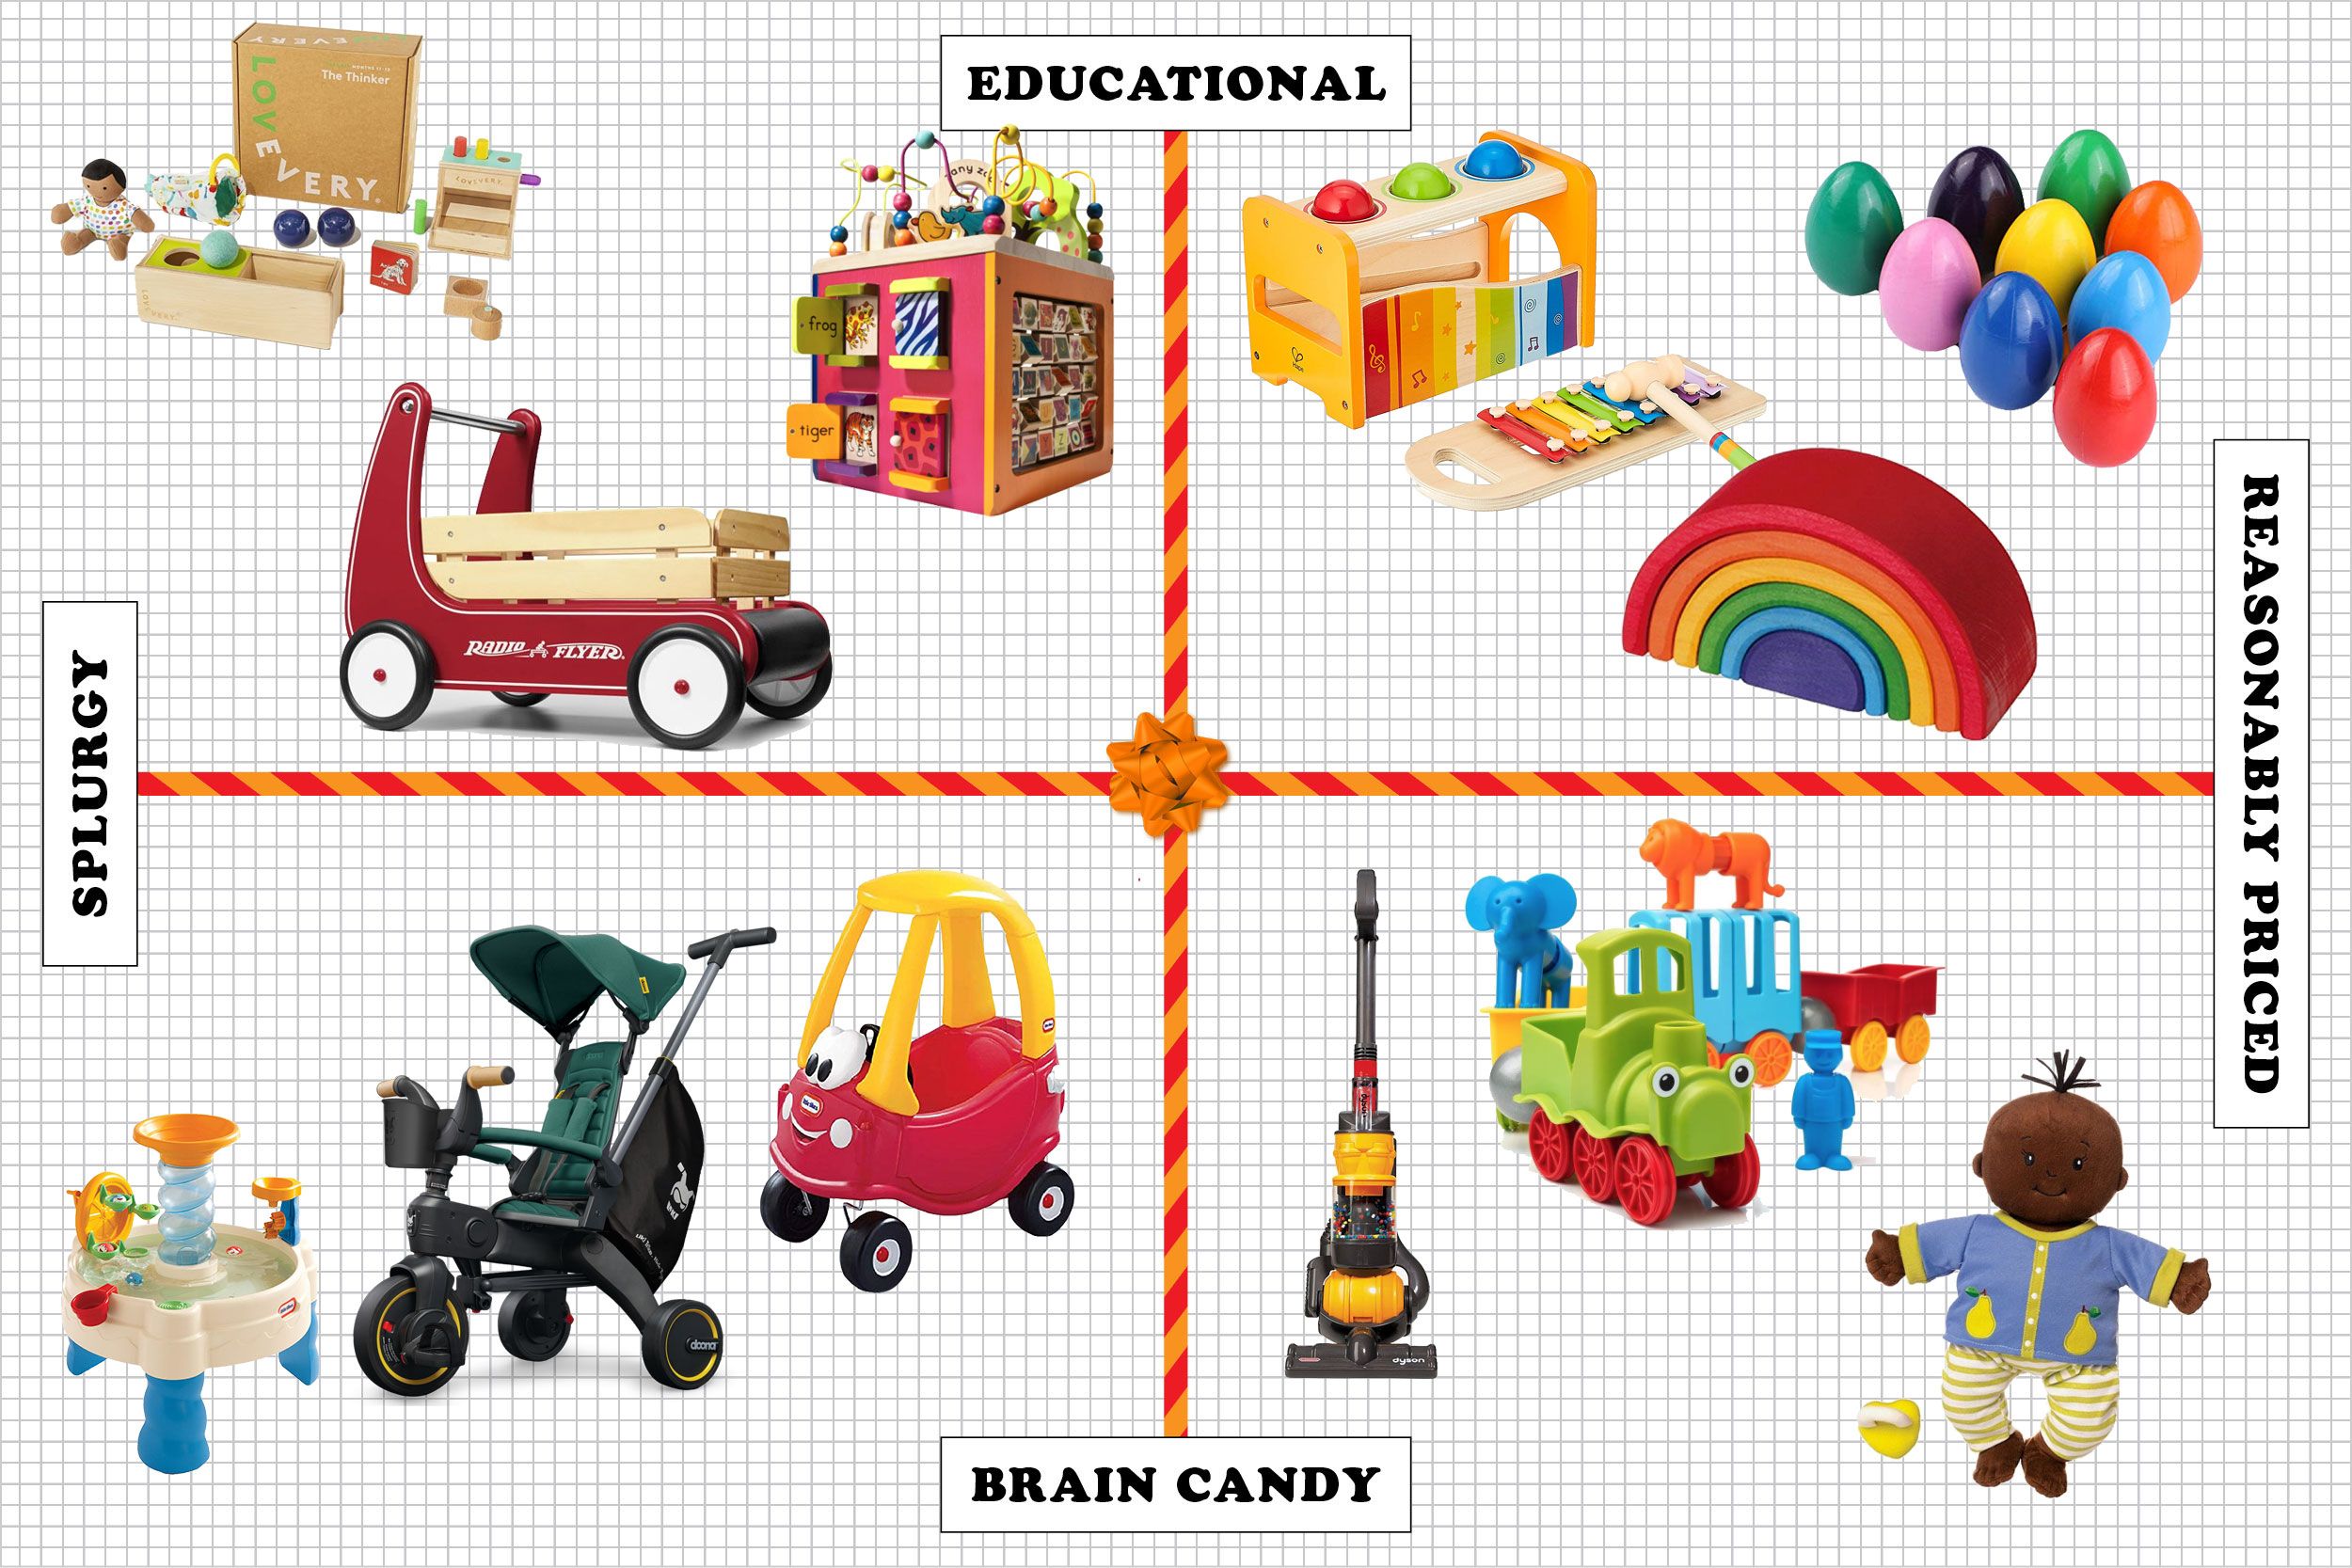 Materials Cards Box Wooden Toys Education Preschool Training Gift 